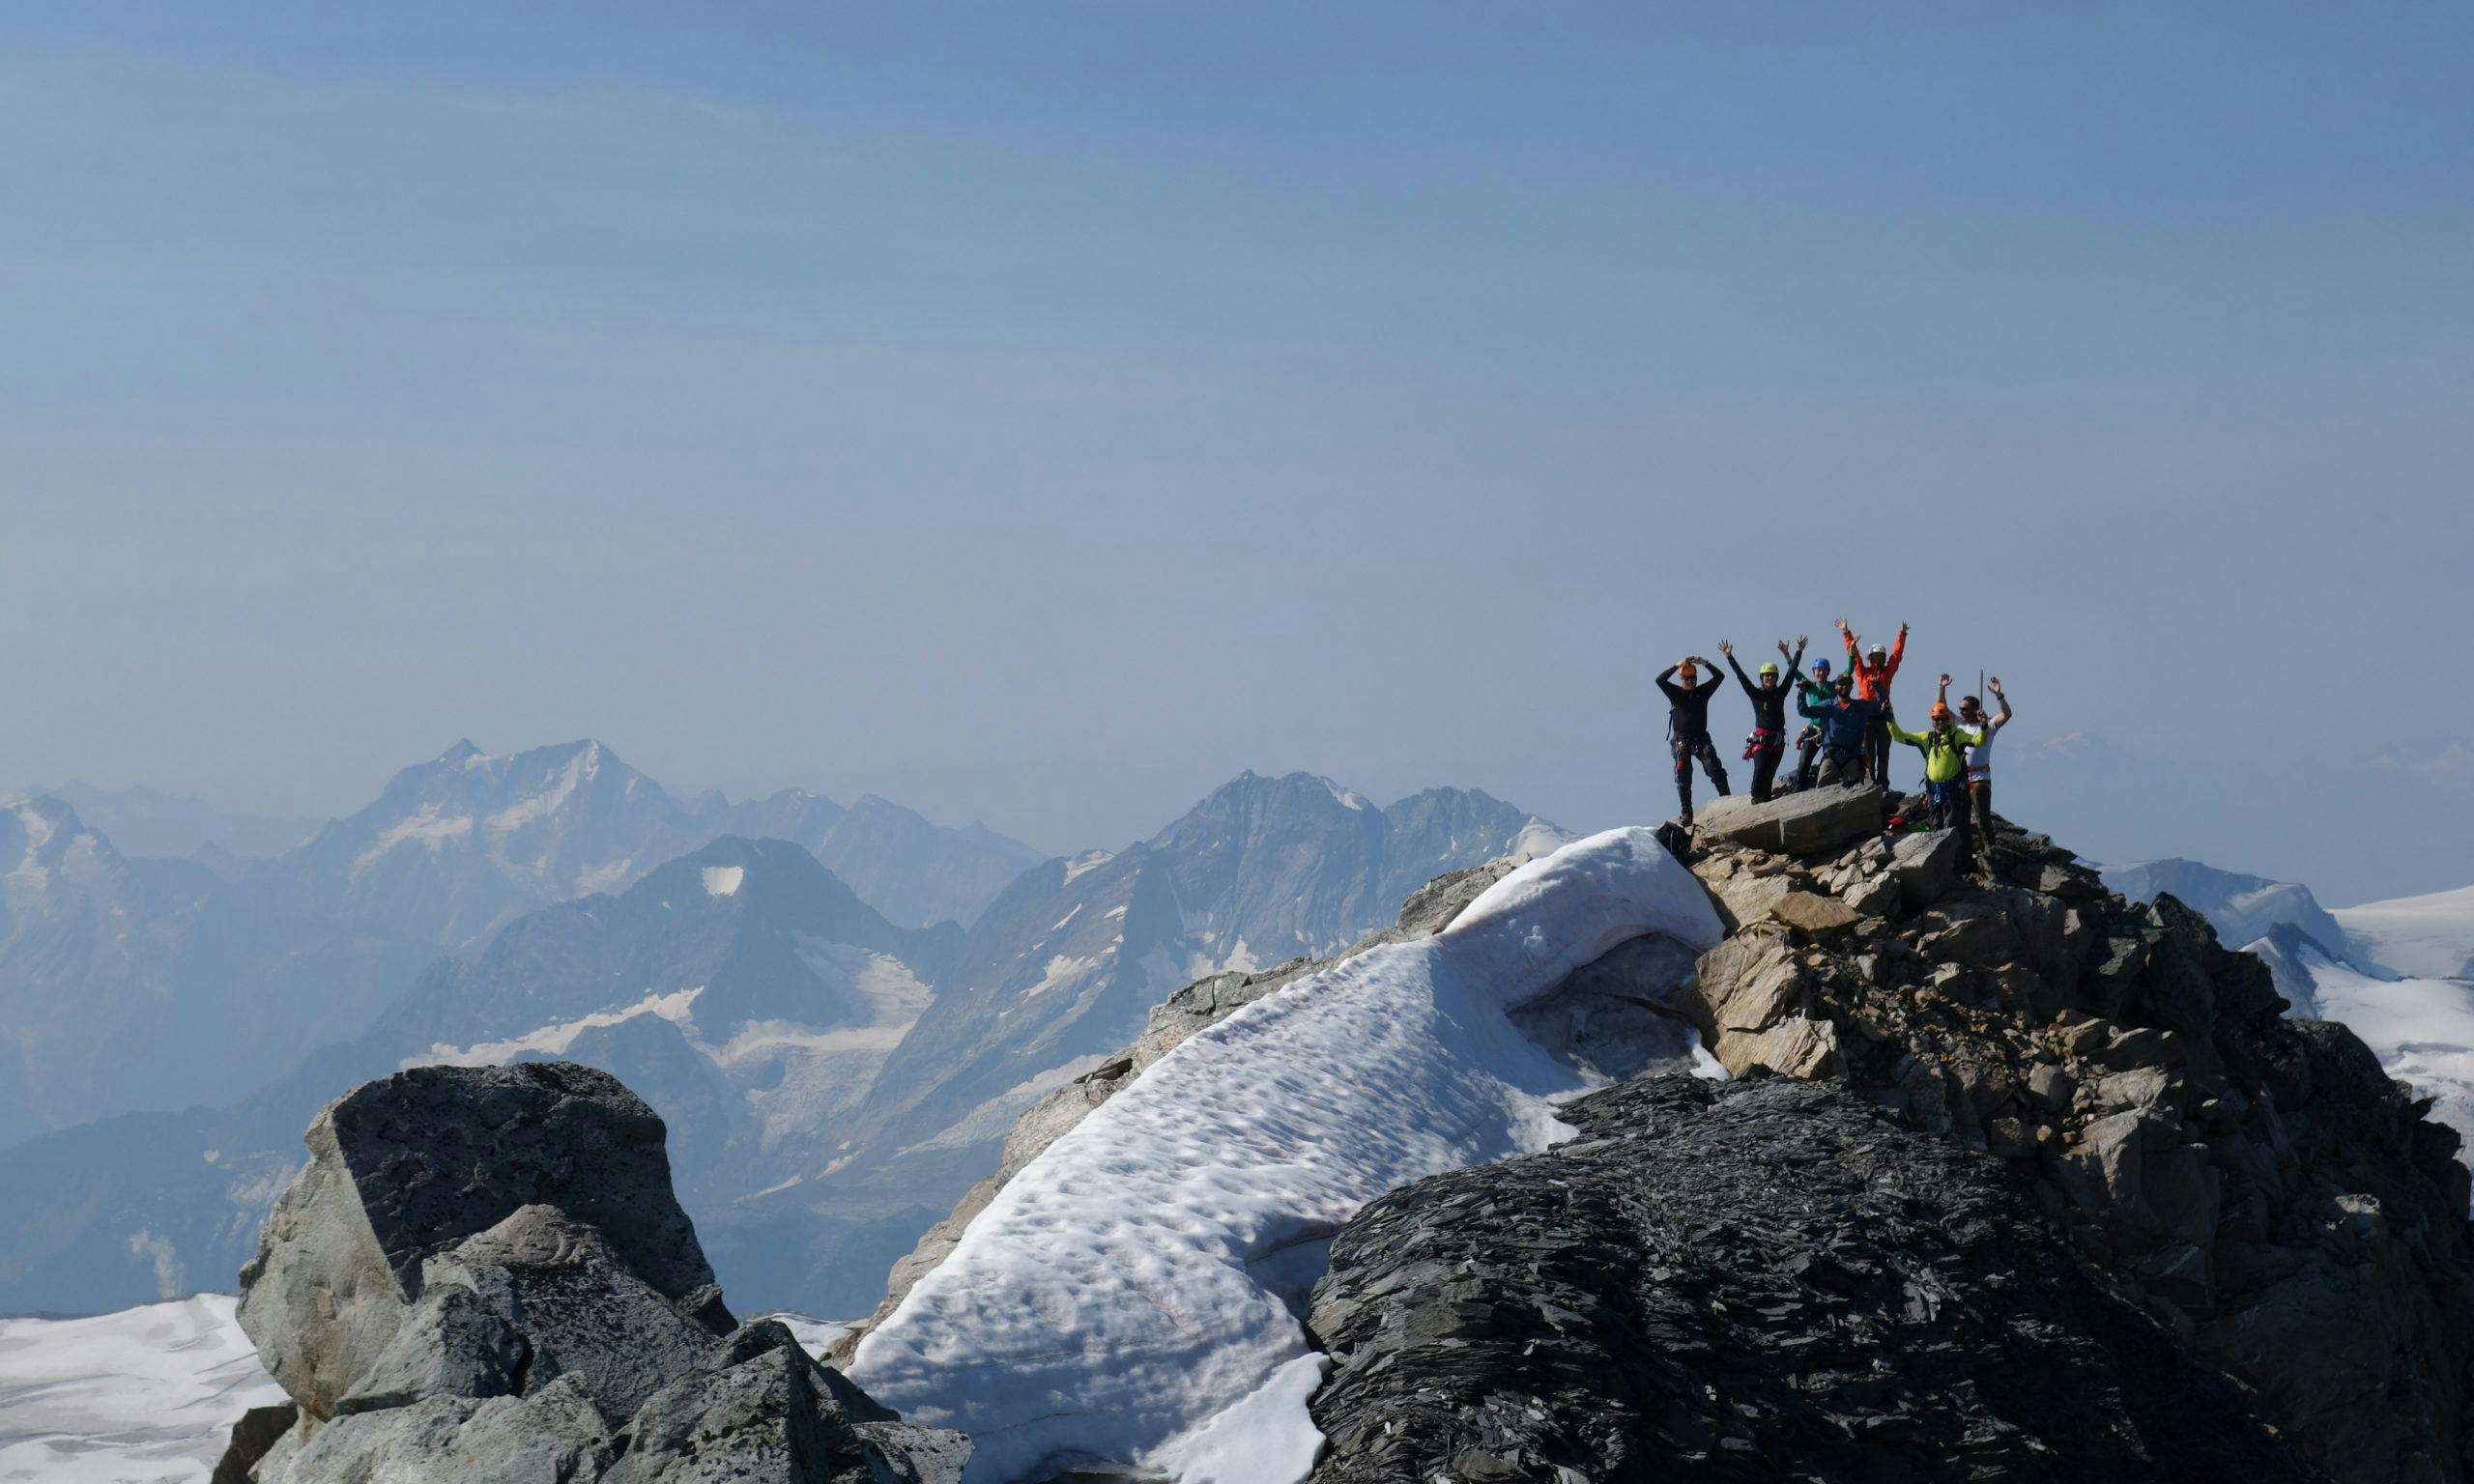 People raising their hands in the distance on a mountaintop